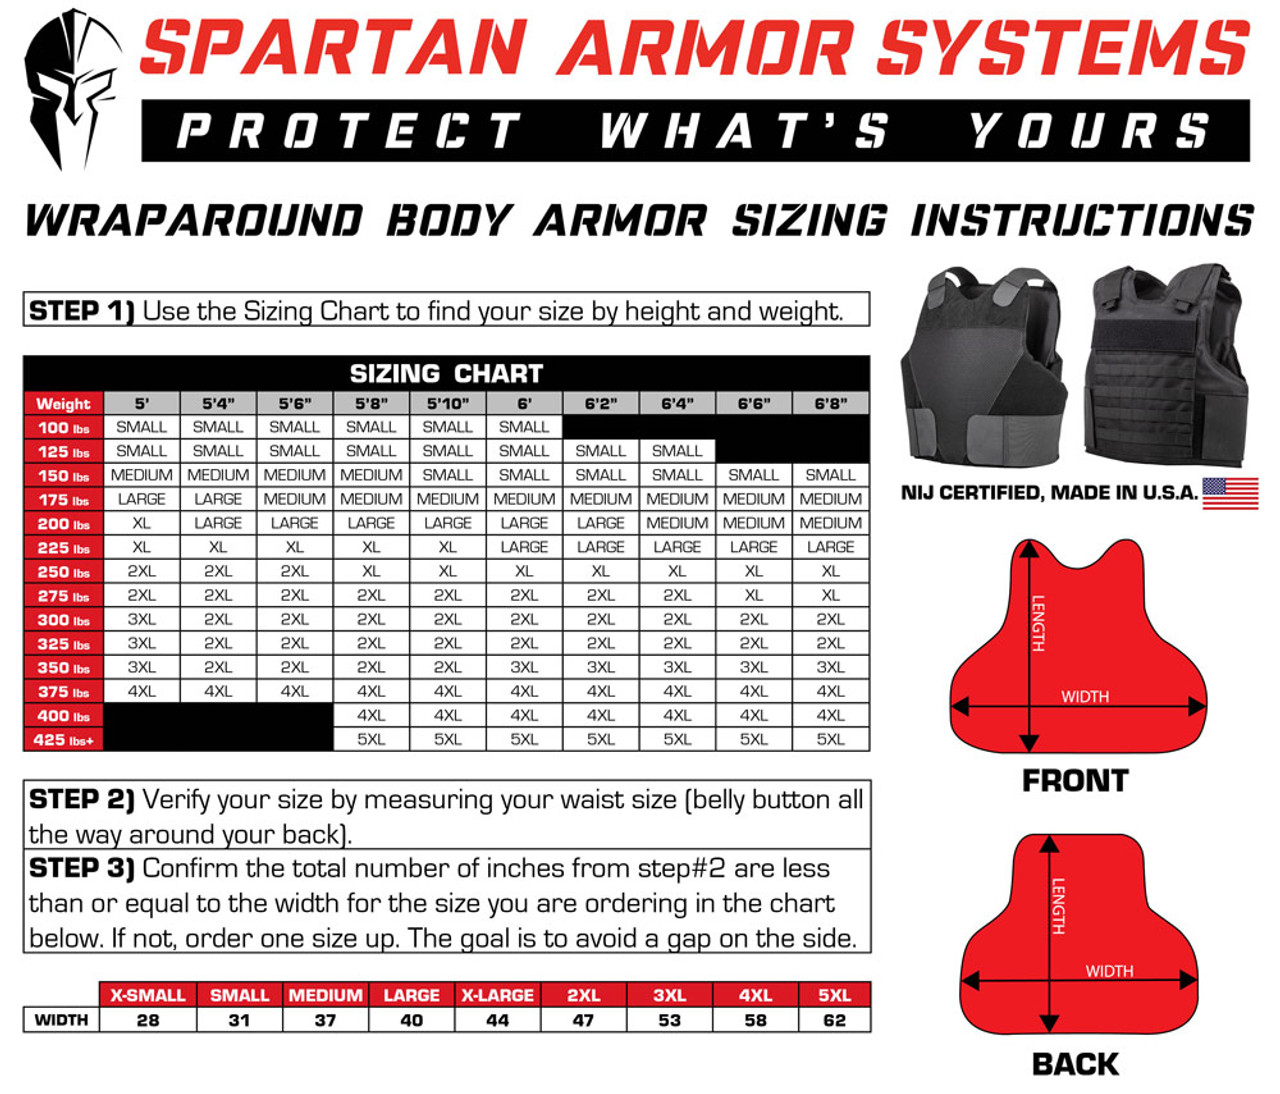 Ghost Concealment Shirt with Flex Fused Core Level IIIA Soft Armor Panels -  By Spartan Armor Systems®